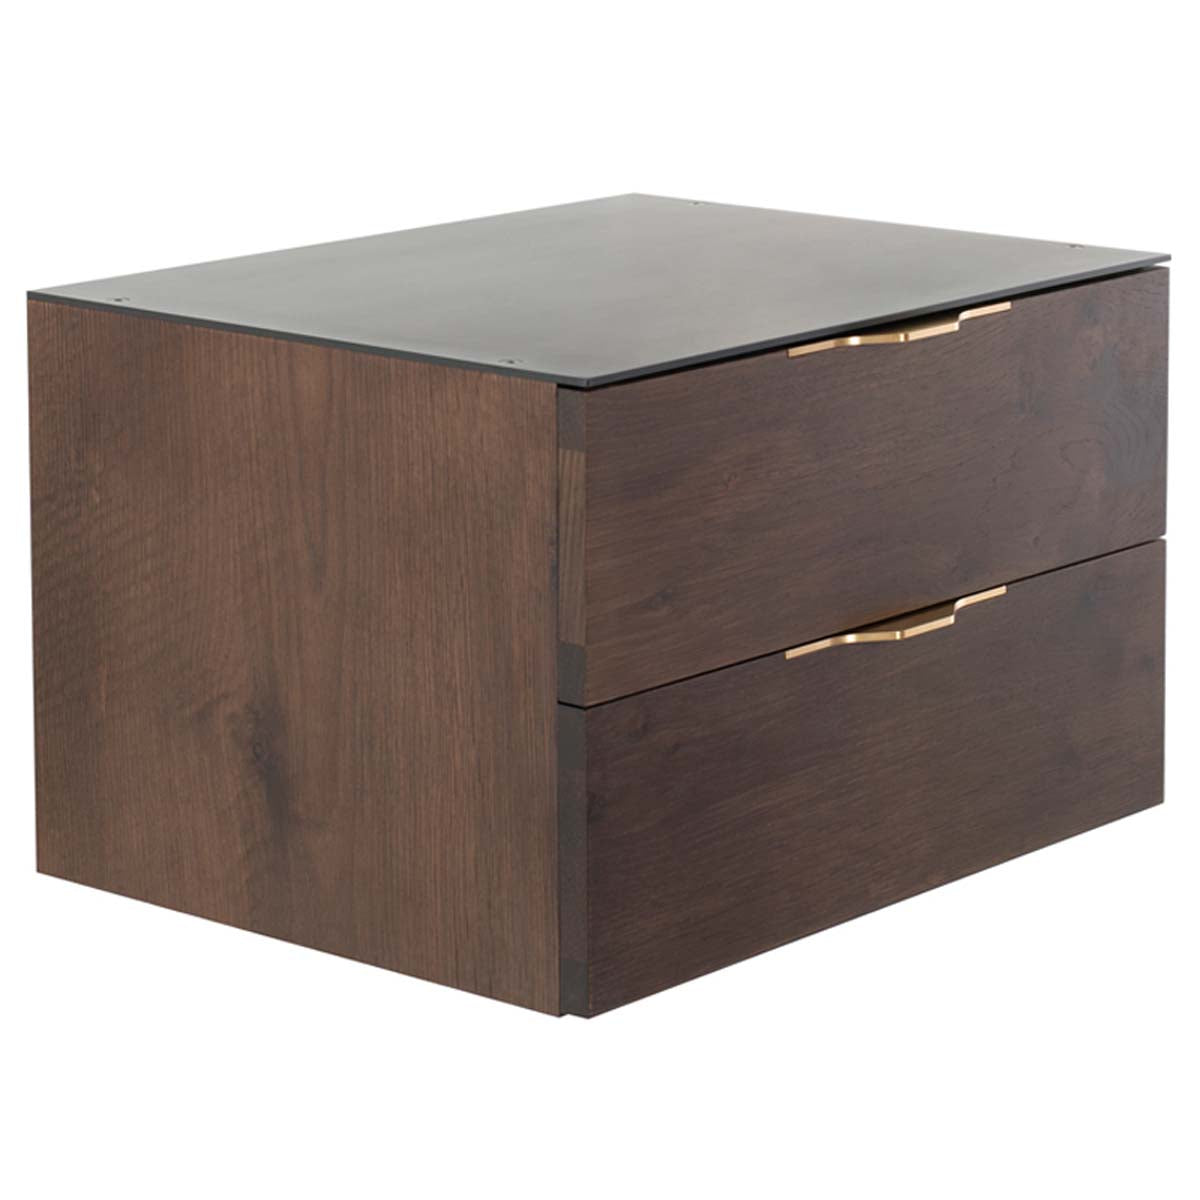 District Eight Drift Side Table - Smoked